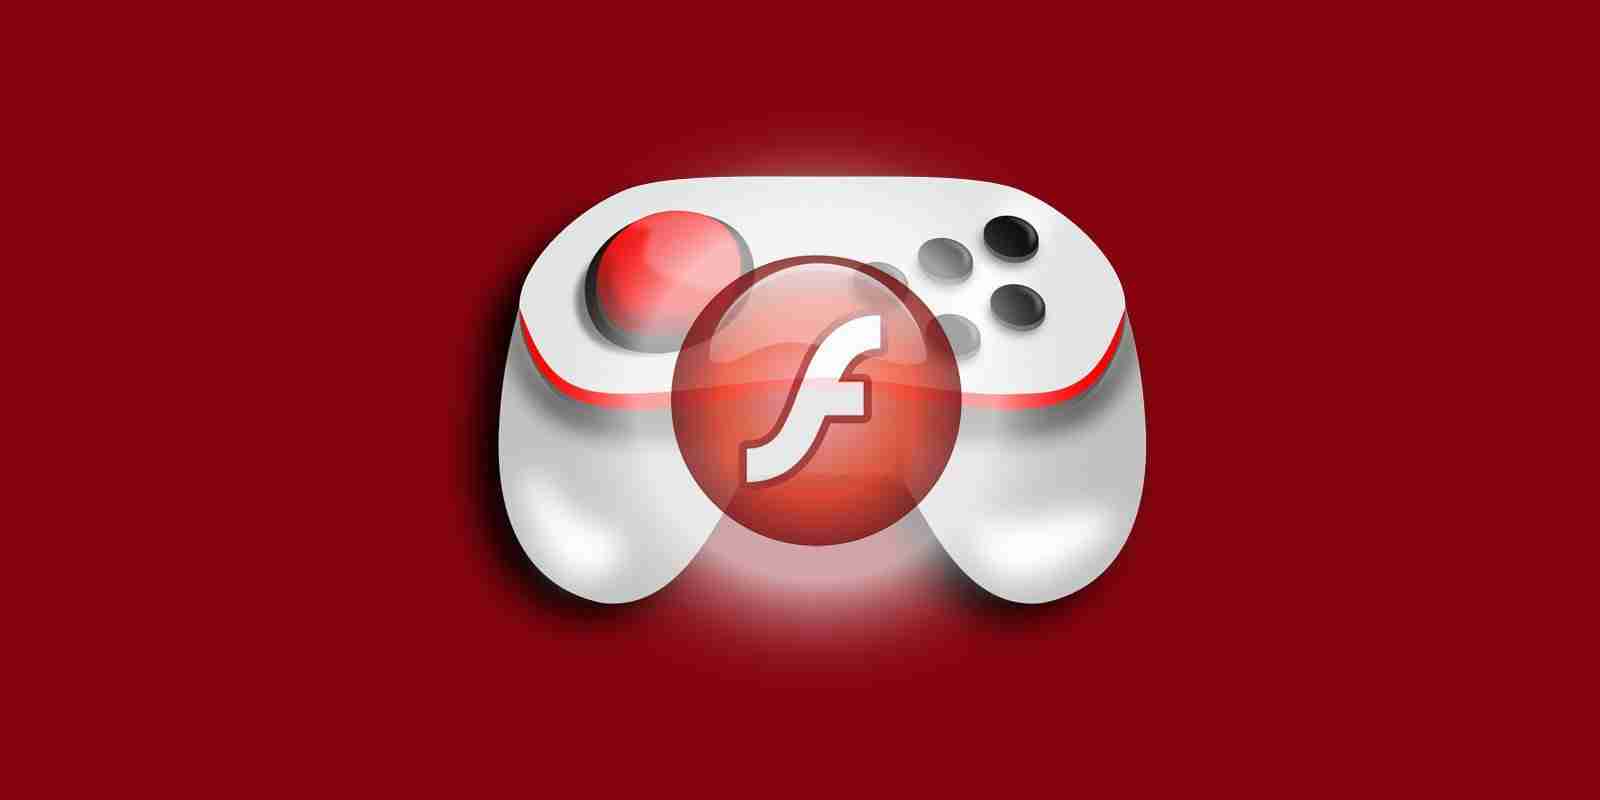 flash game player pc